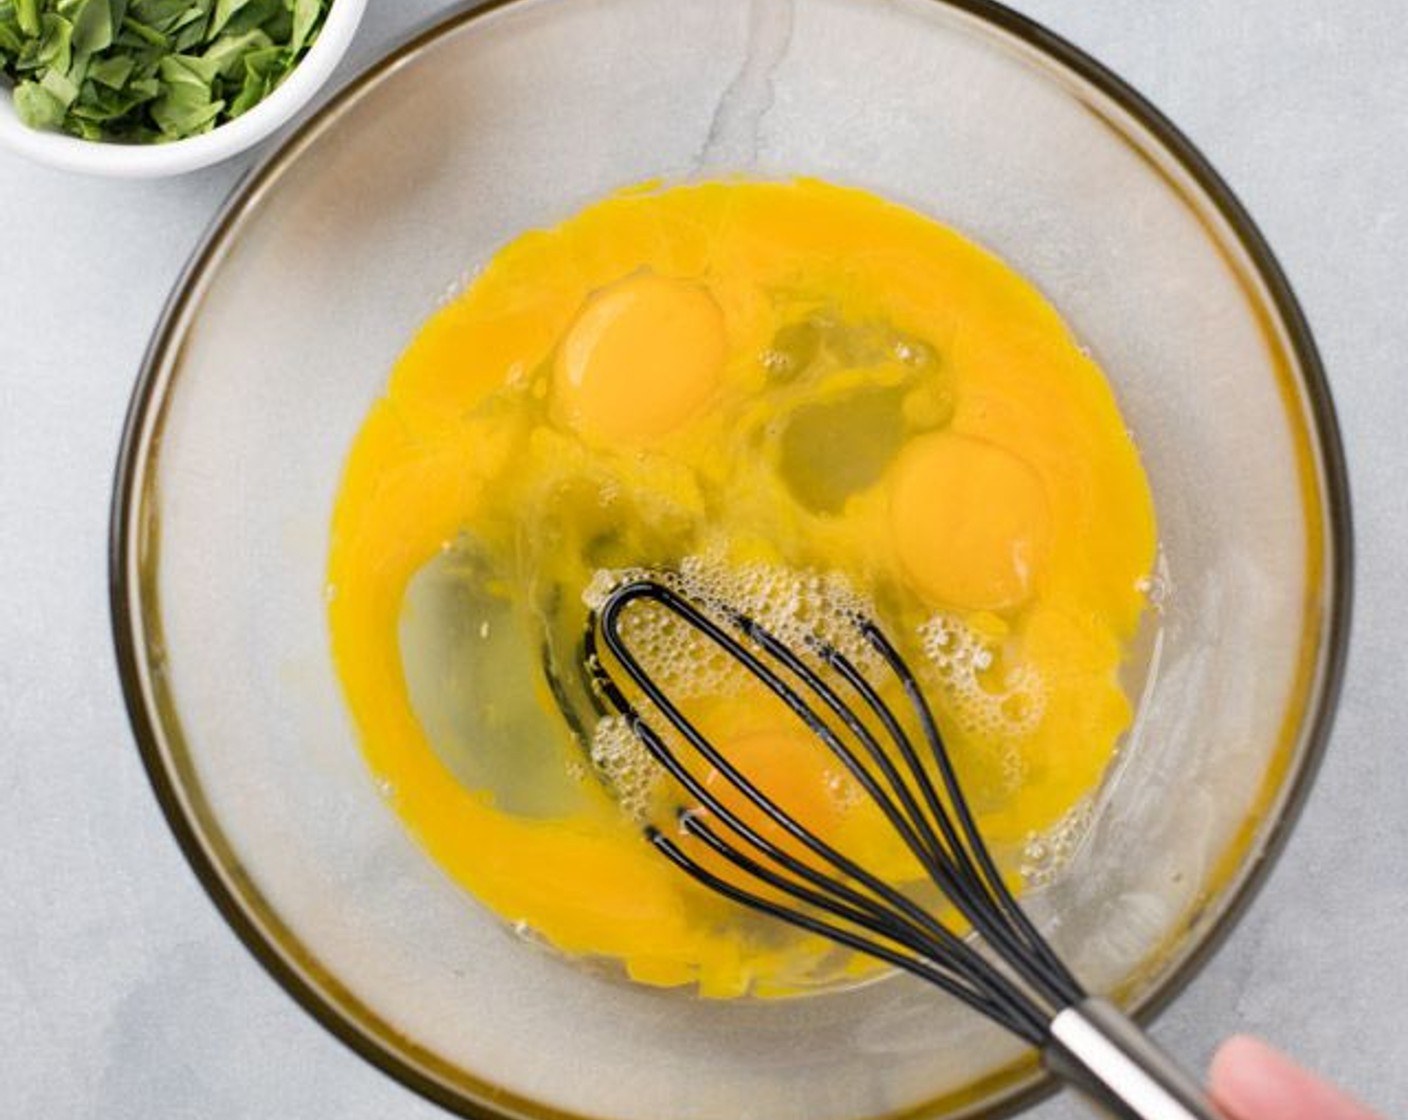 step 5 In a large bowl, whisk the Eggs (5). Add the Mild Banana Pepper (1/4 cup), Fresh Spinach (1/2 cup), and Salt (1/4 tsp) and whisk again until all is incorporated.